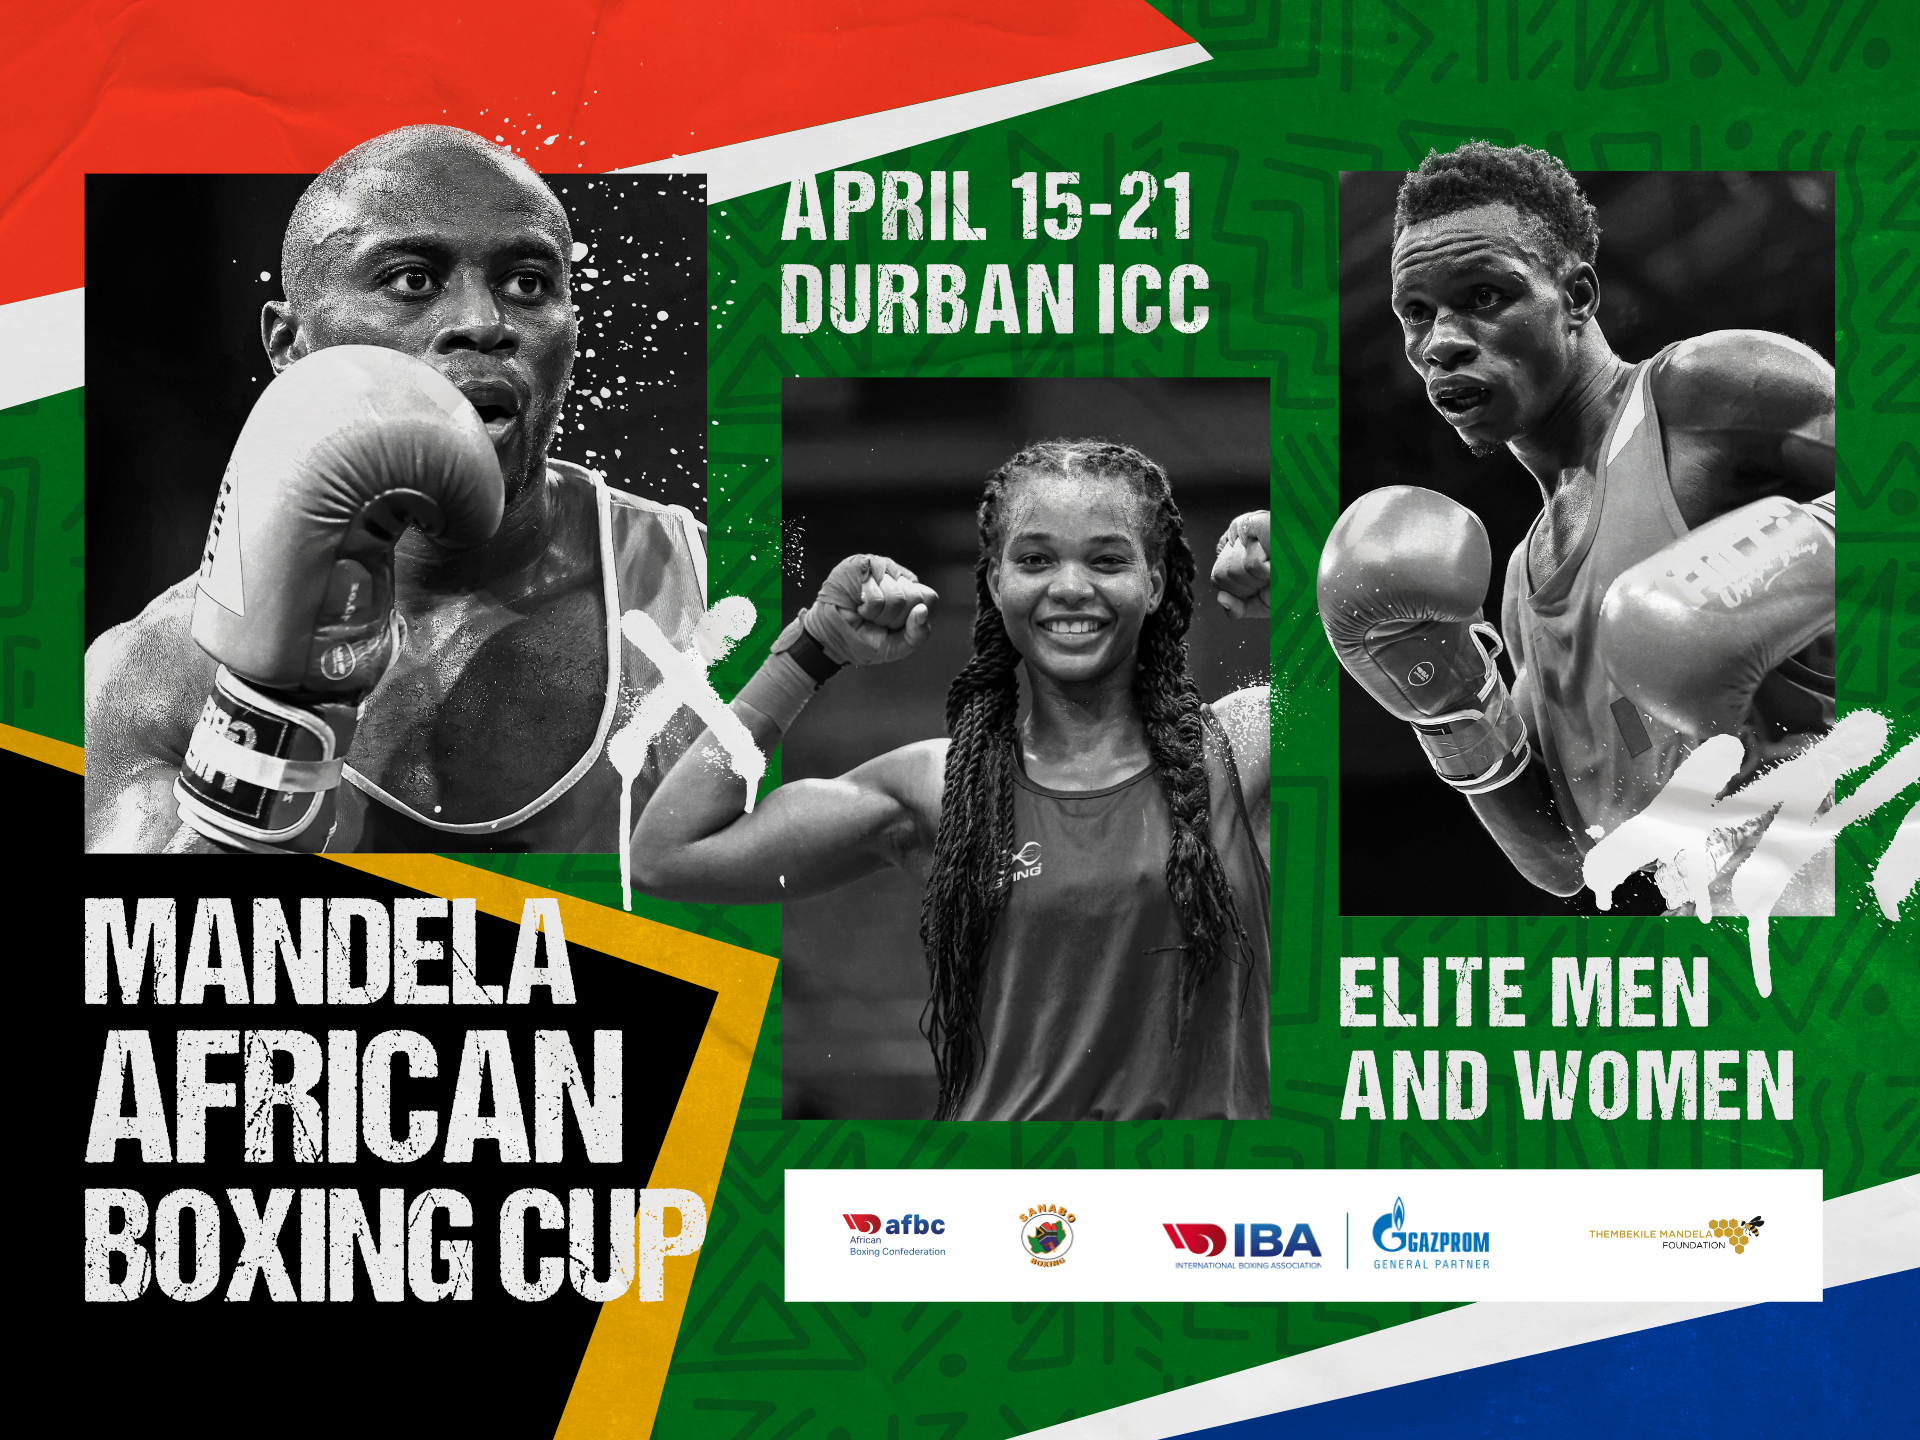 Inaugural Mandela African Boxing Cup to take place this April in Durban